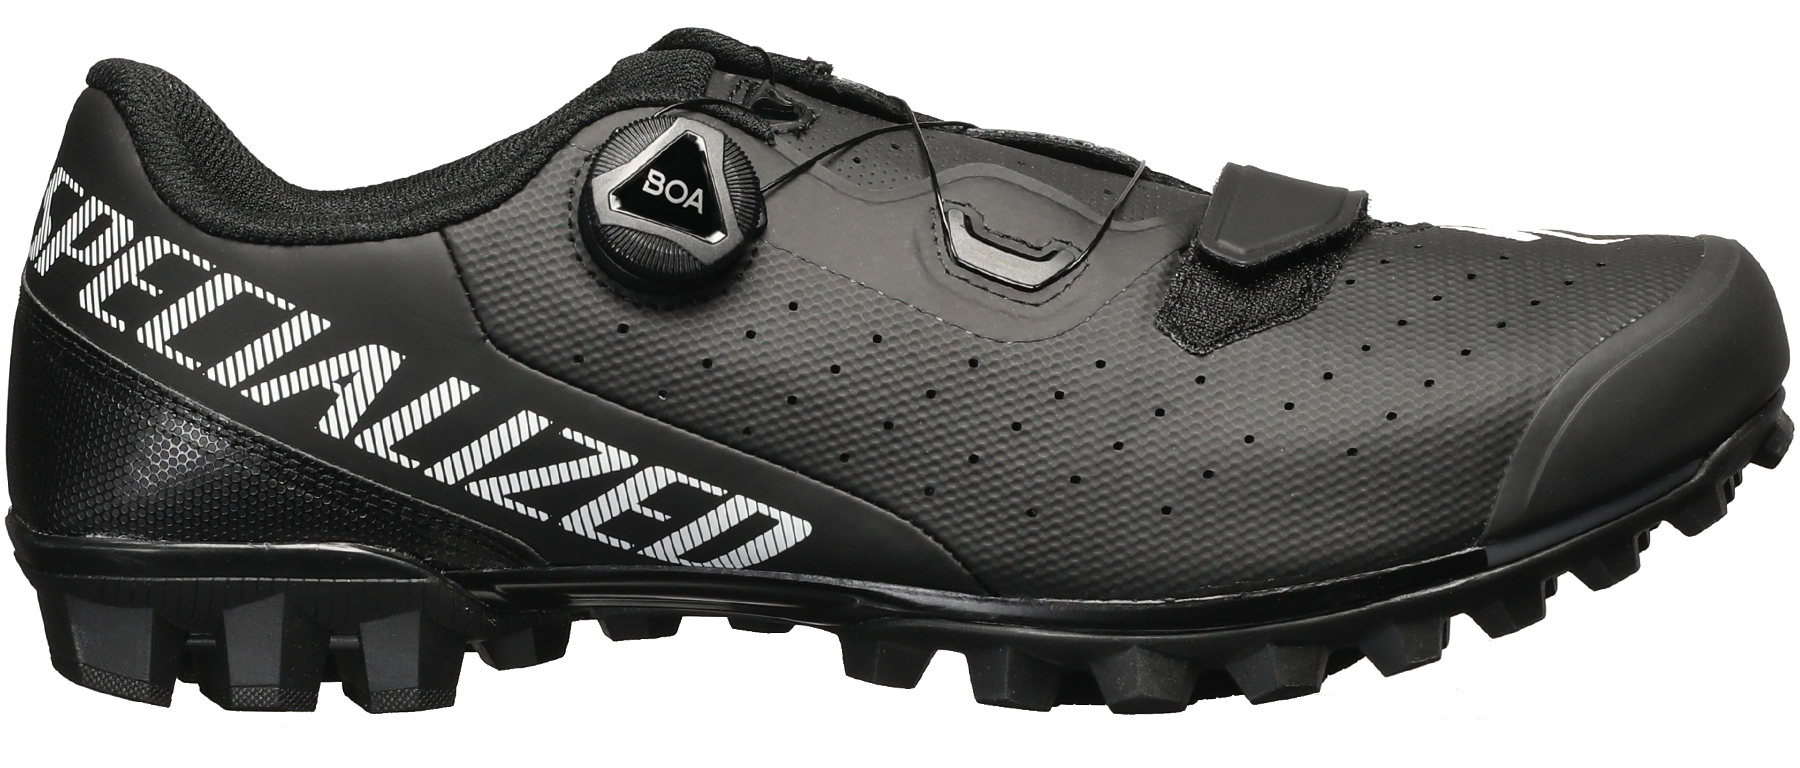 Specialized Recon 2.0 Mountain Shoe